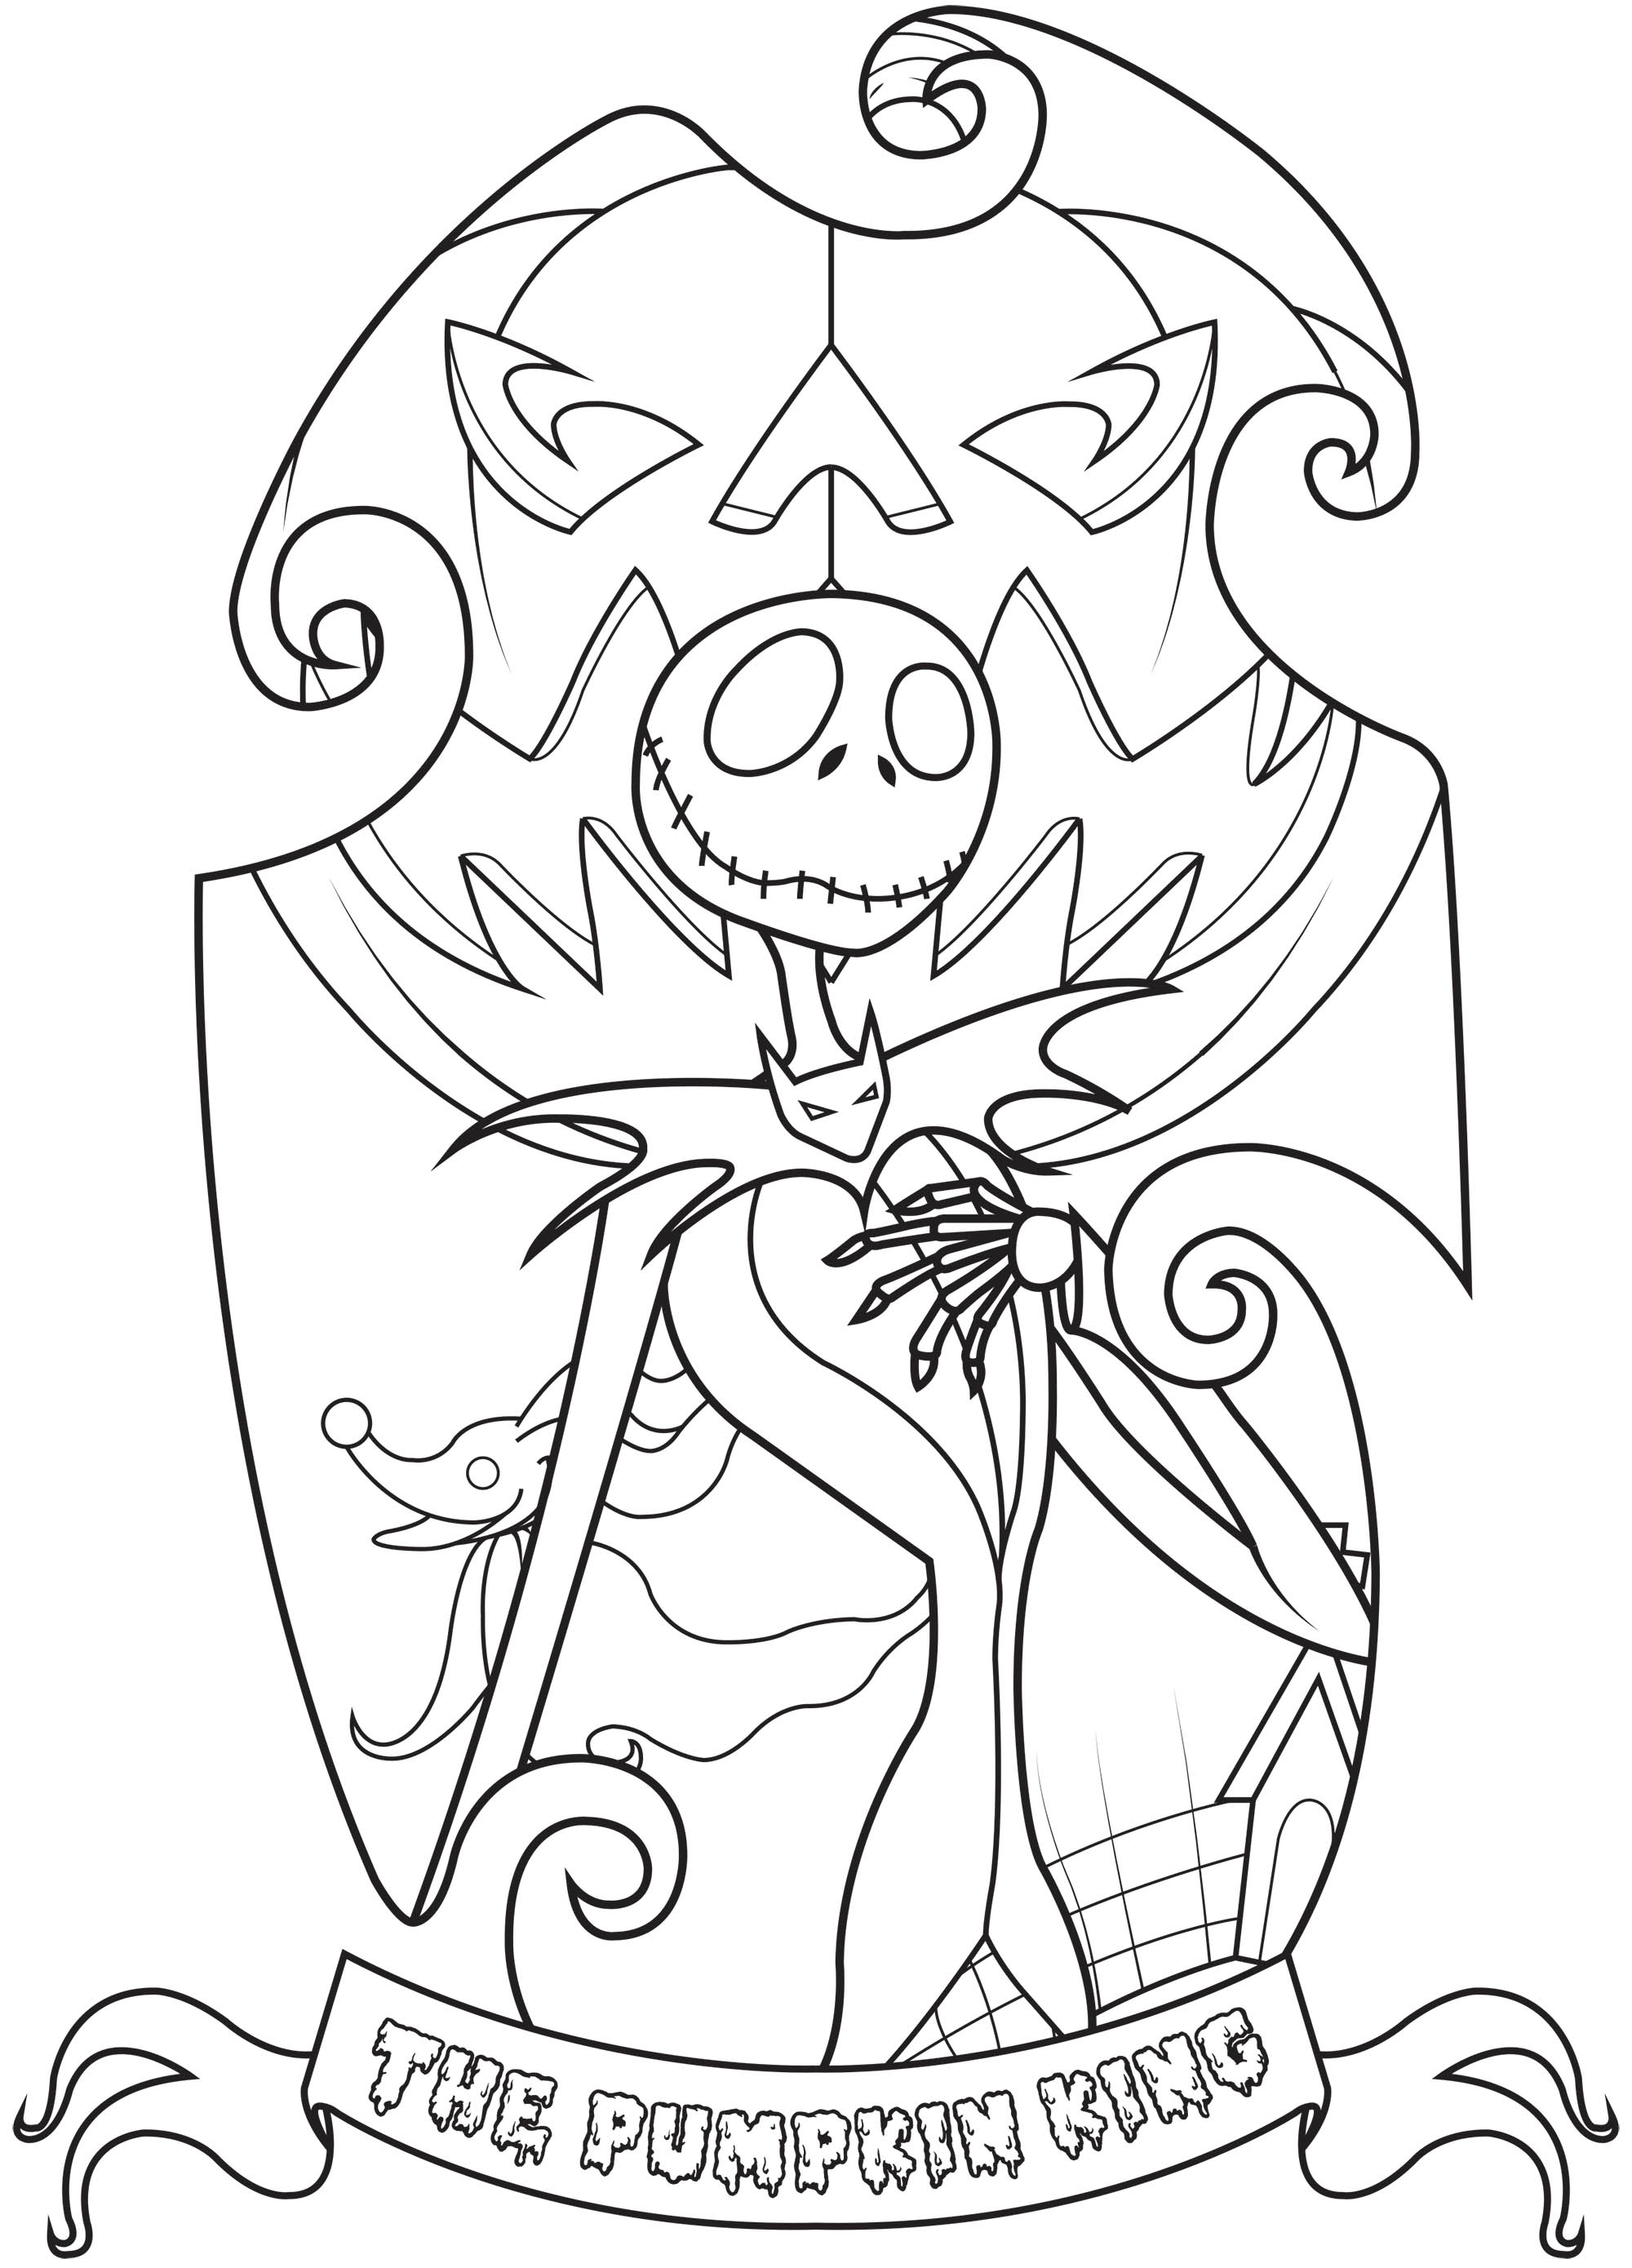 Jack Skellington - The Nightmare Before Christmas Kids Coloring Pages